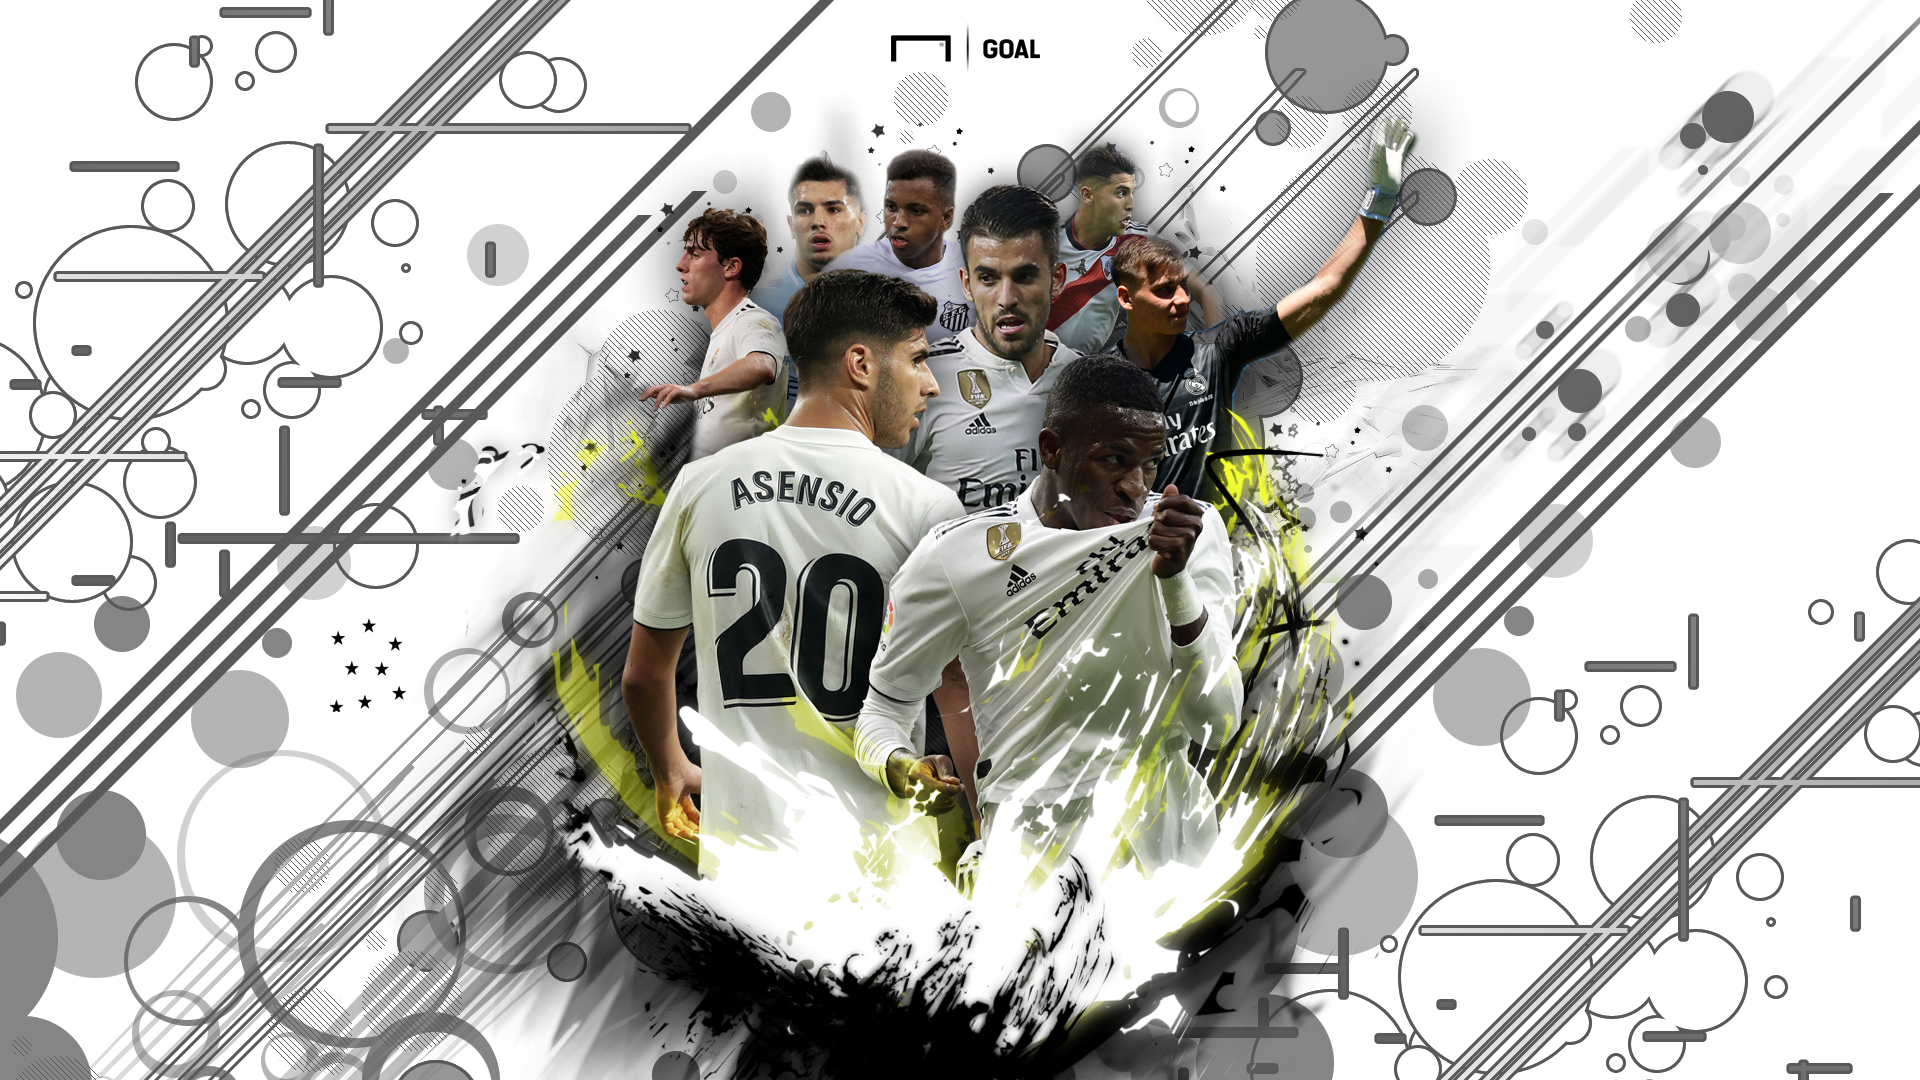 Brahim Diaz, Palacios & Lunin: How Real Madrid are building for